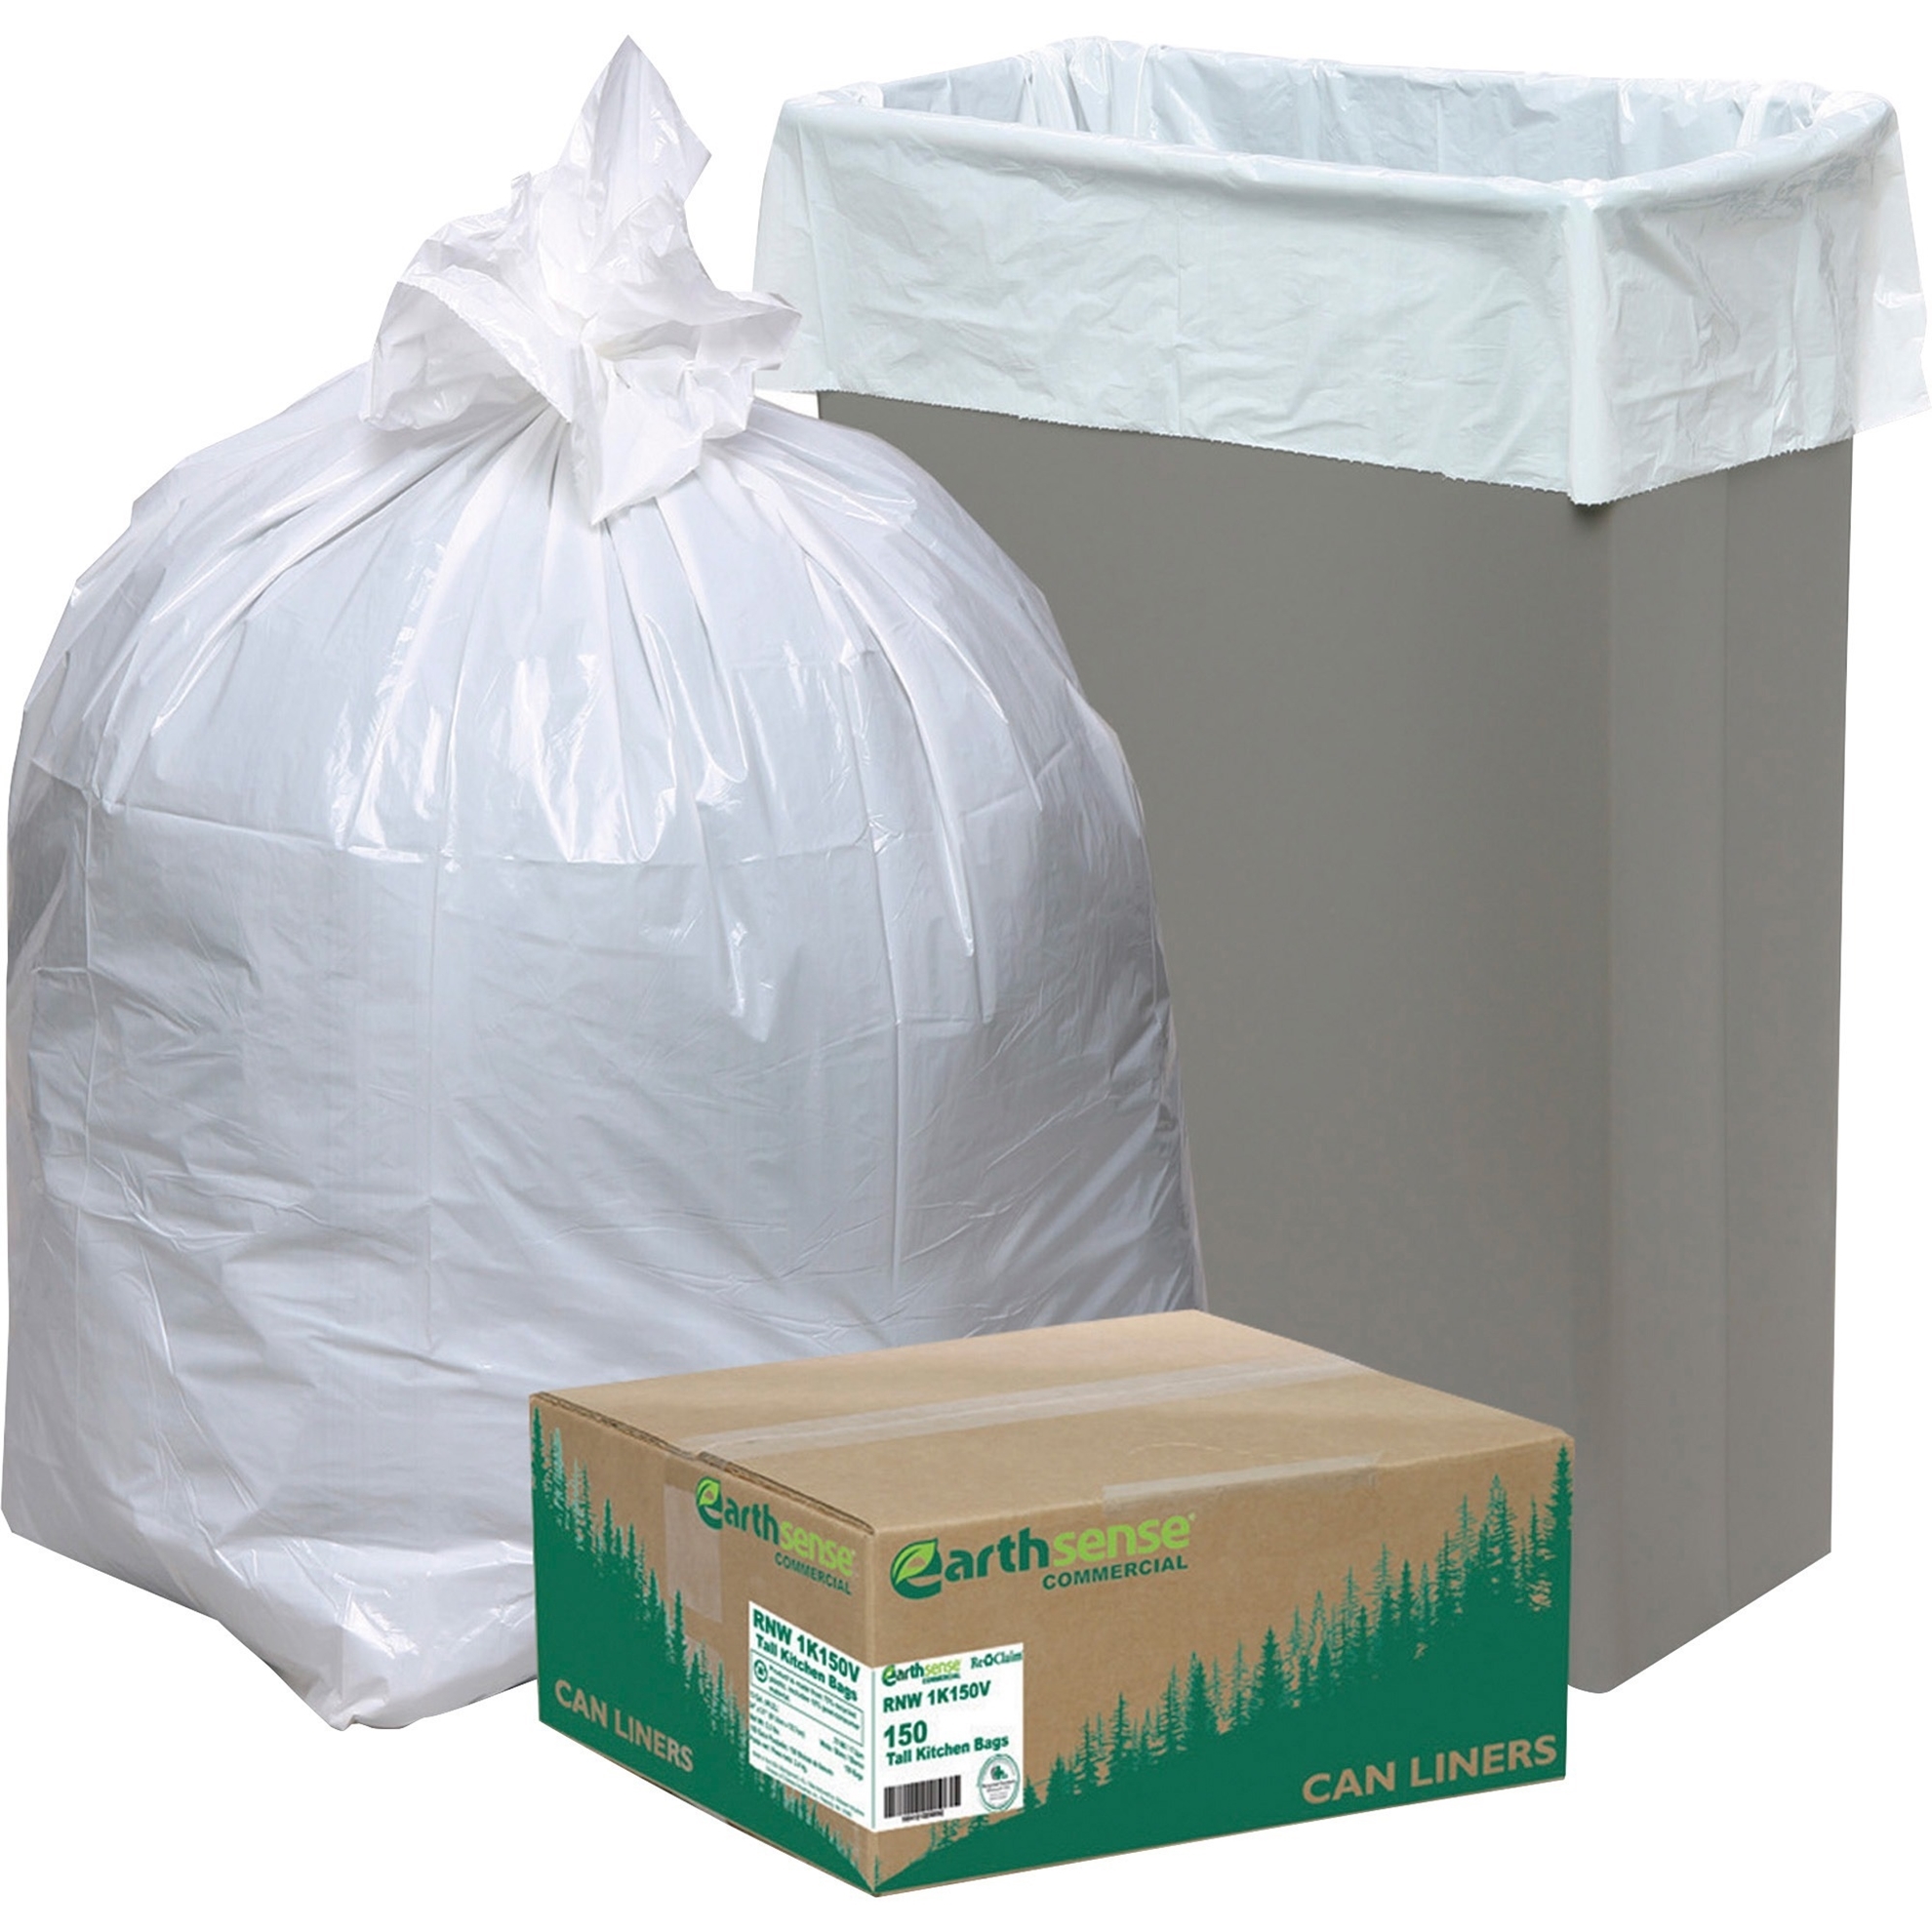 https://www.elevatemarketplace.com/content/images/thumbs/0072012_earthsense-commercial-trash-bags-recycled-can-liners-12-16gal-8mil-24-x-33-white-150-bagsbox-wbirnw1.jpeg